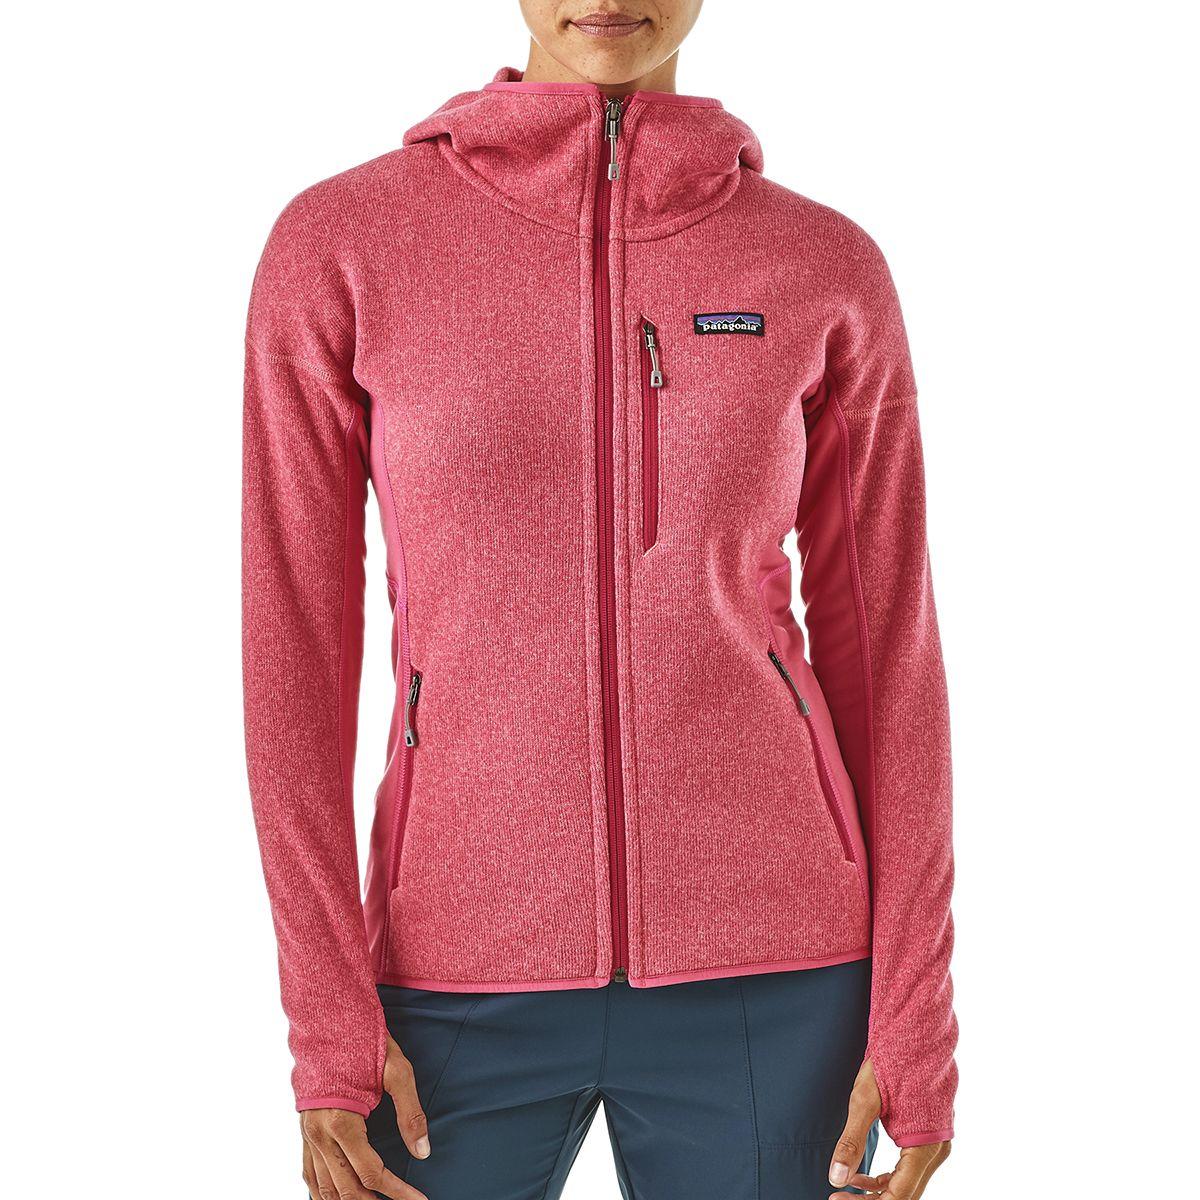 Patagonia Performance Better Sweater Fleece Jacket in Pink - Lyst